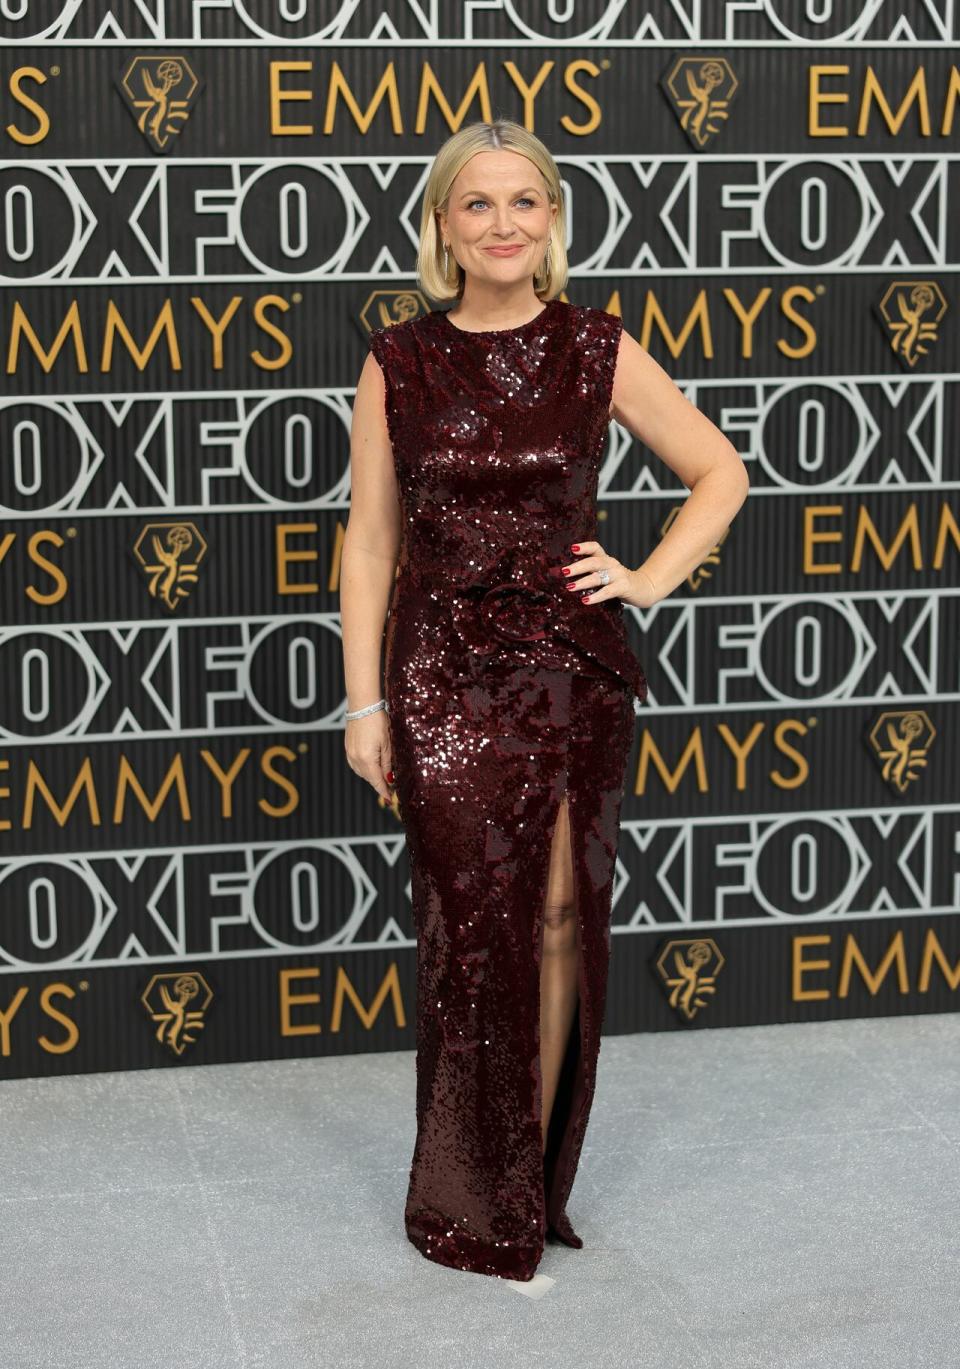 Former Parks and Recreation star Amy Poehler wears a wine-coloured short sleeve dress with a high slit in the leg.